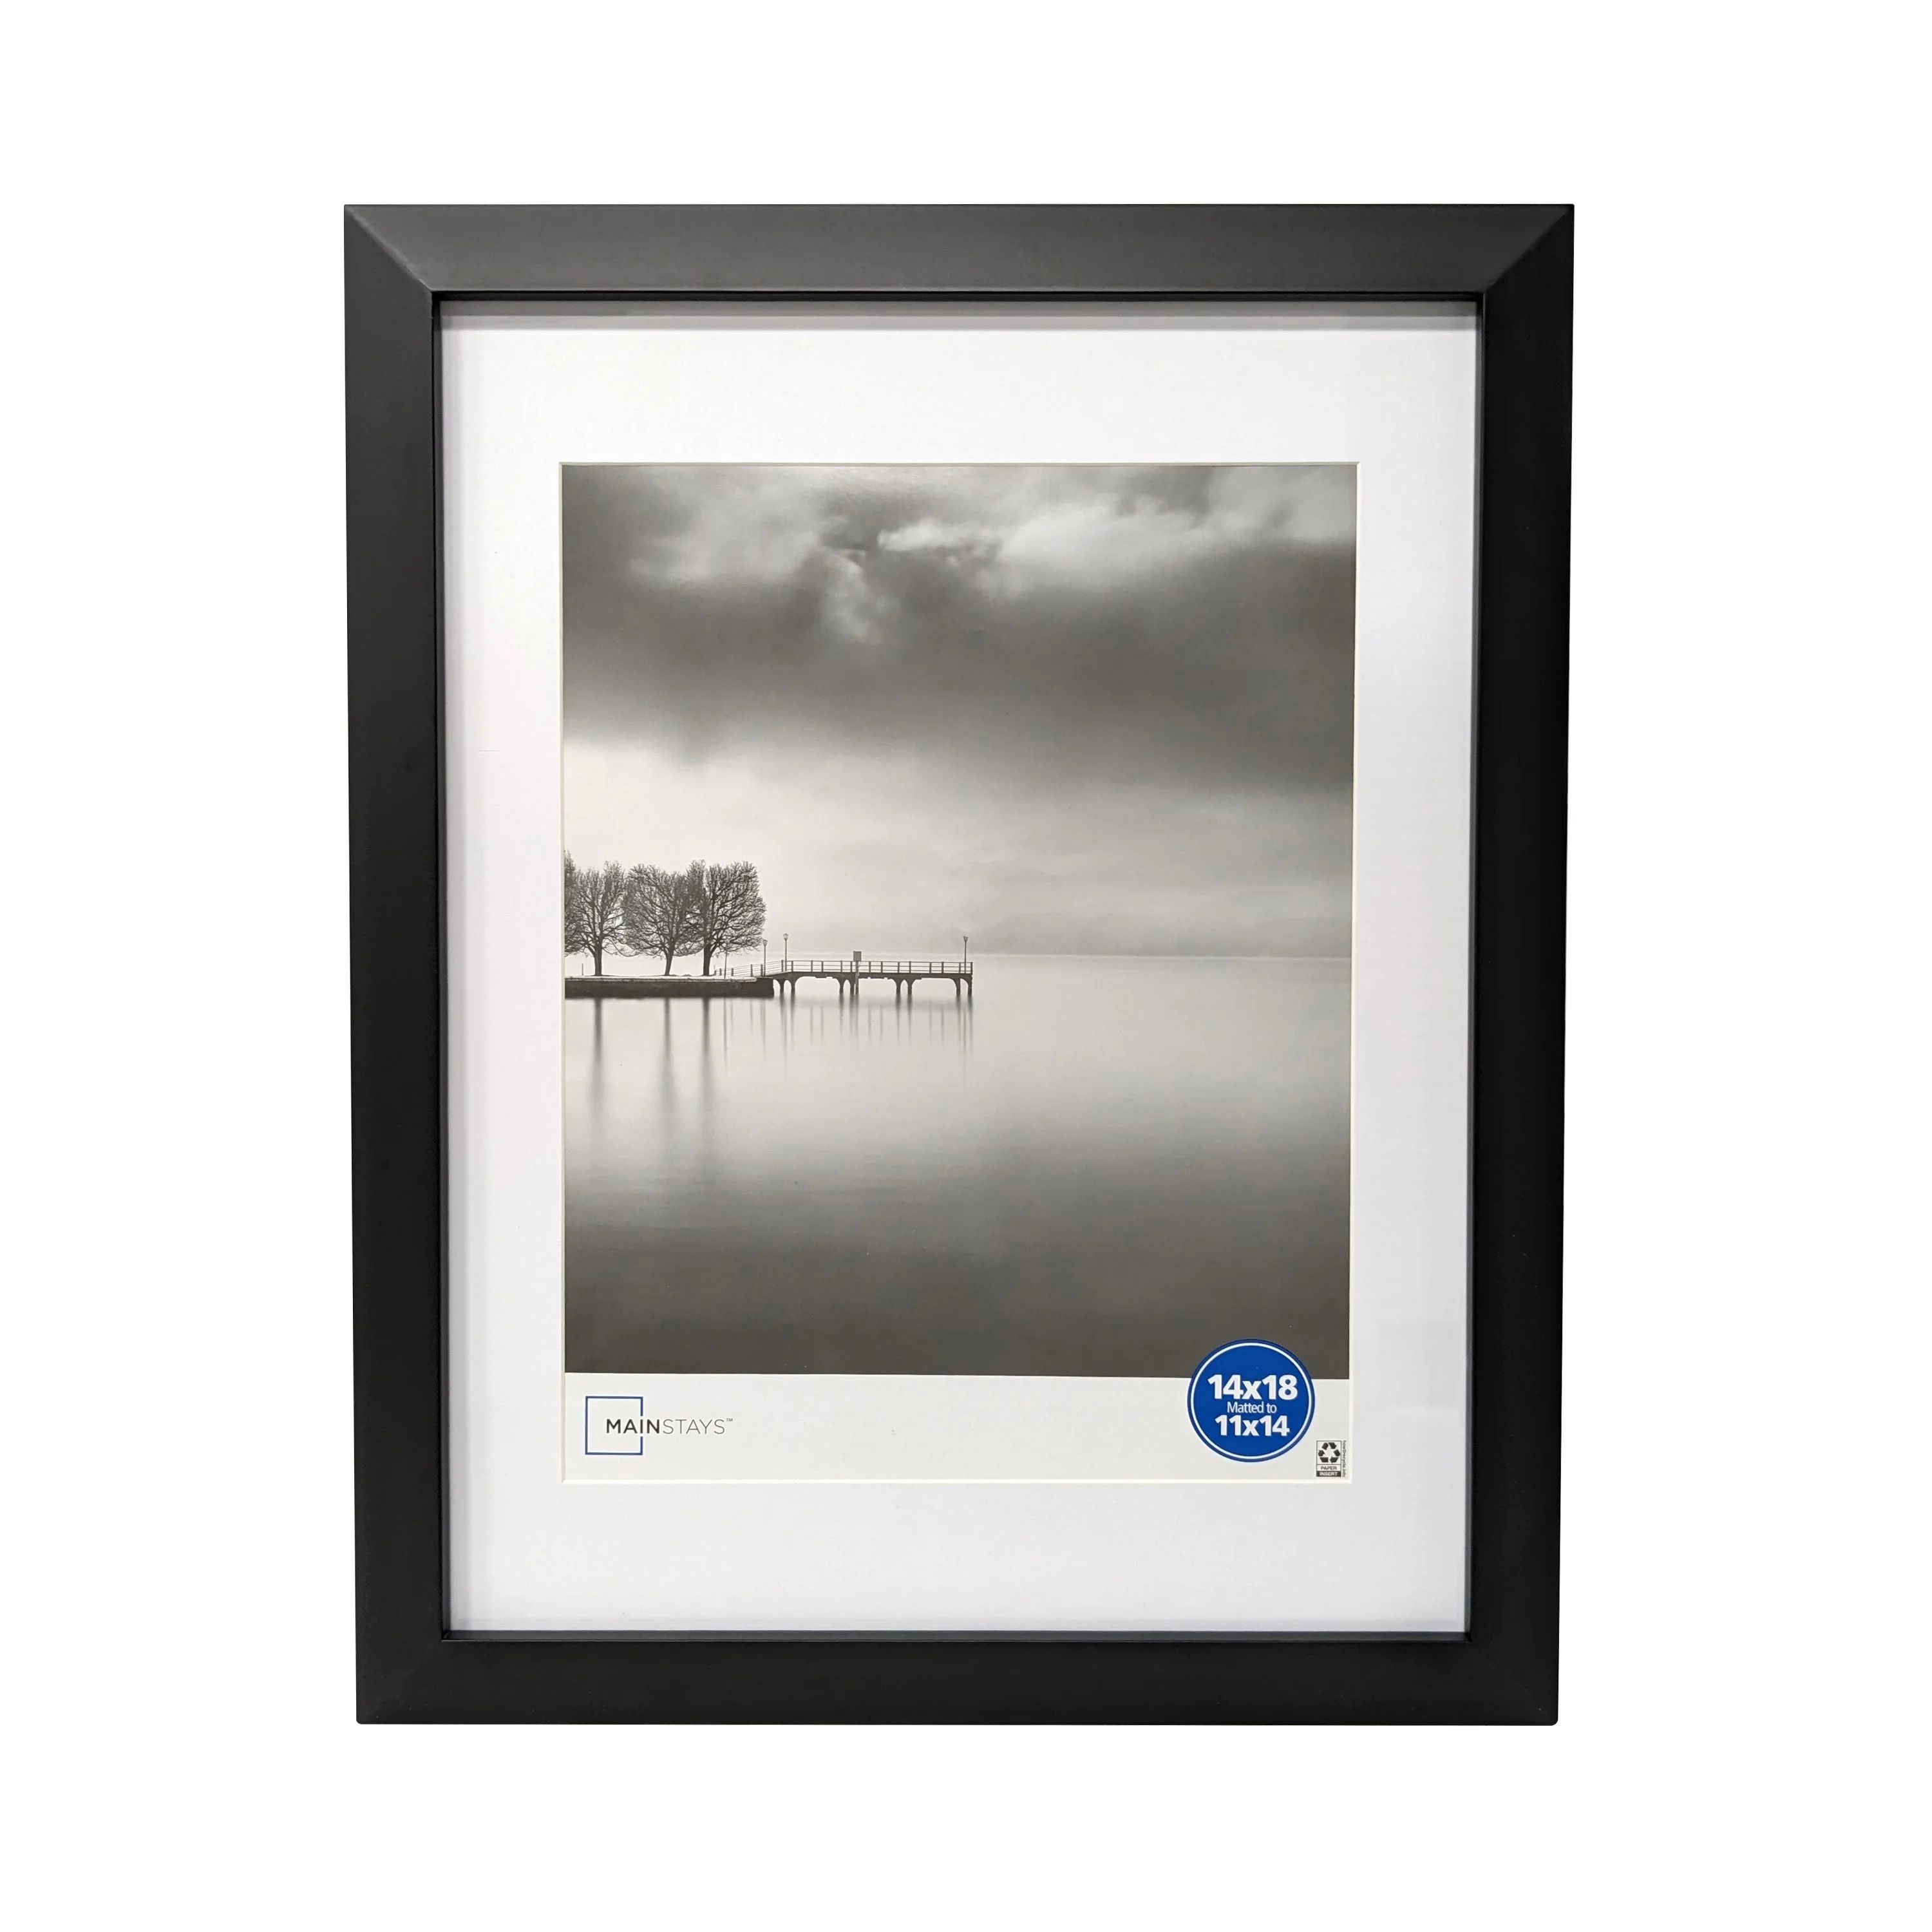 Mainstays 14x18 Matted to 11x14 Wide Beveled Gallery Wall Picture Frame, Black | Walmart (US)